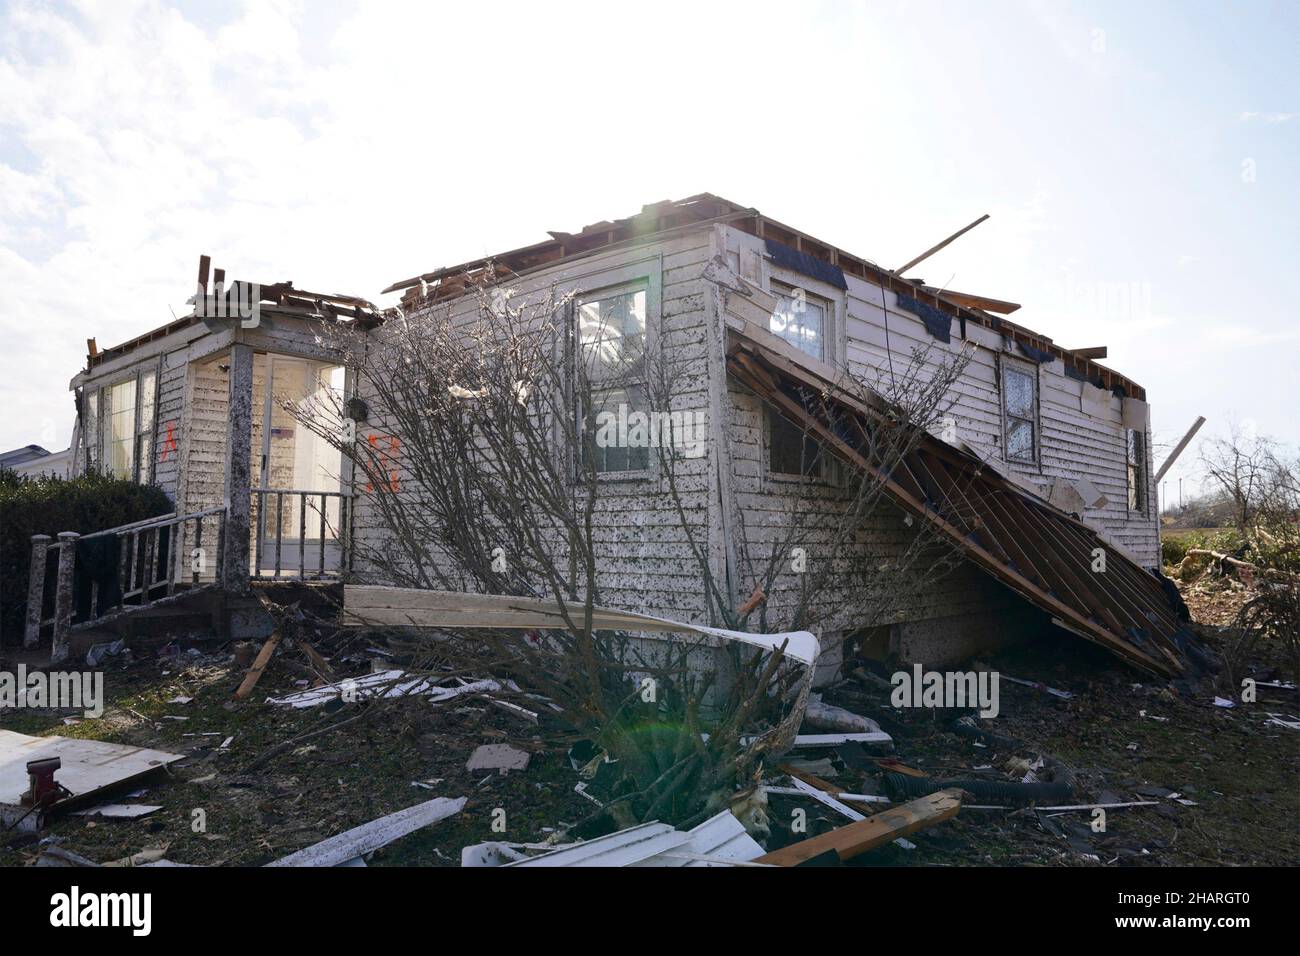 Dawson Springs, United States of America. 14 December, 2021. Debris of destroyed homes in the aftermath of devastating tornadoes that swept across four states destroying structures and killing dozens December 14, 2021 in Dawson Springs, Kentucky. Credit: Dominick Del Vecchio/FEMA/Alamy Live News Stock Photo